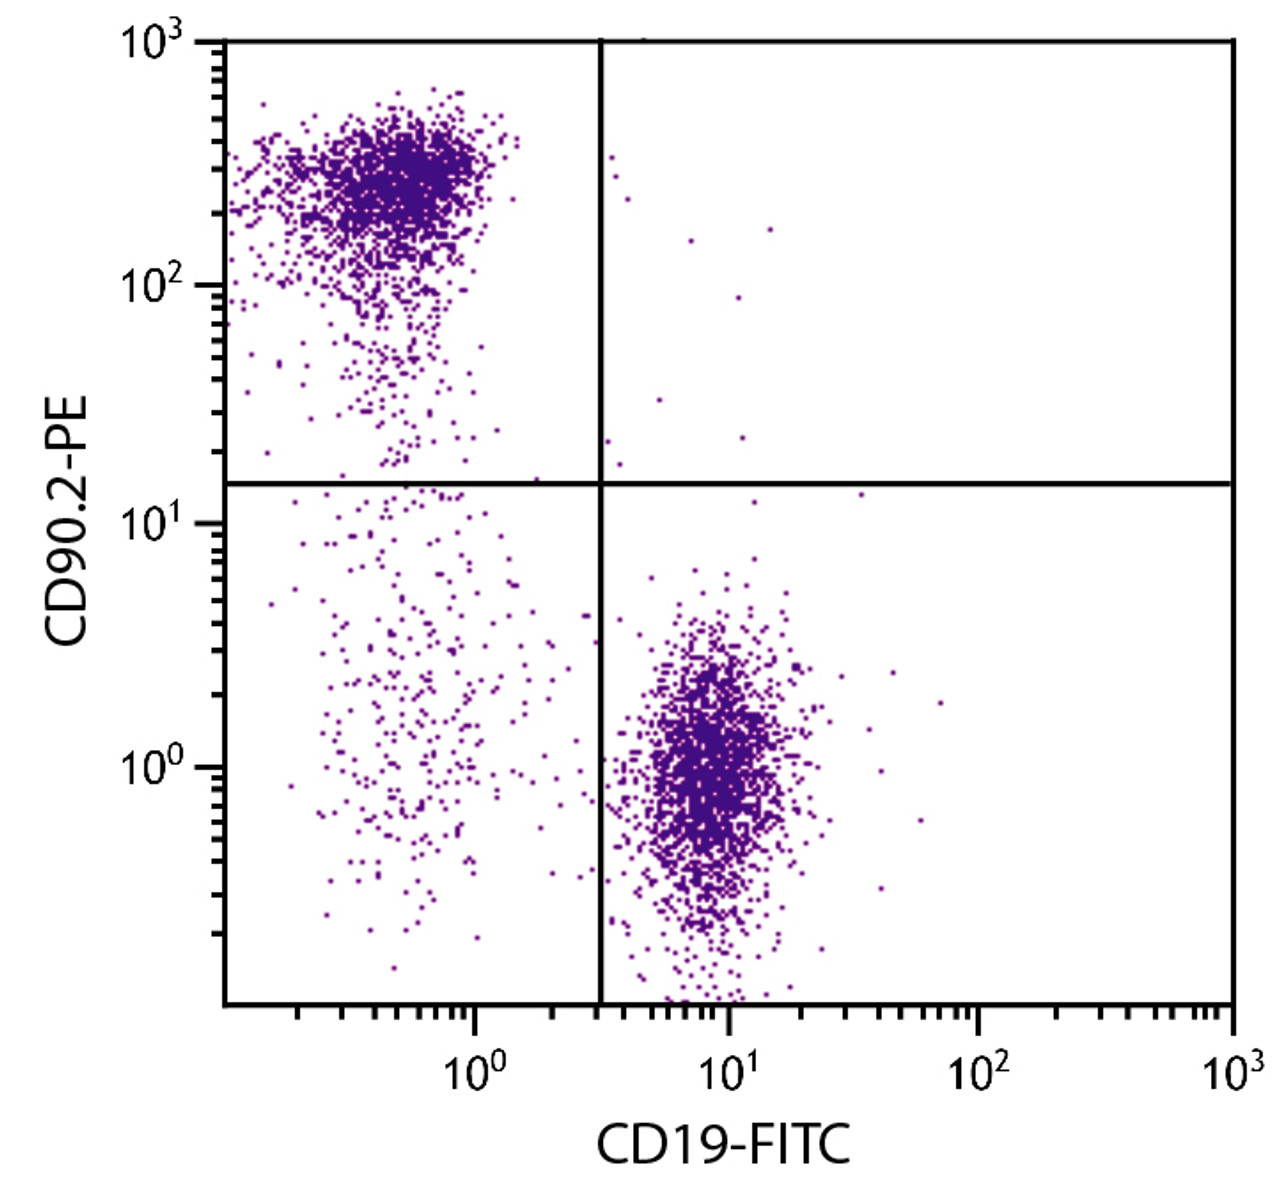 BALB/c mouse splenocytes were stained with Rat Anti-Mouse CD90.2-PE (Cat. No. 98-870) and Rat Anti-Mouse CD19-FITC .